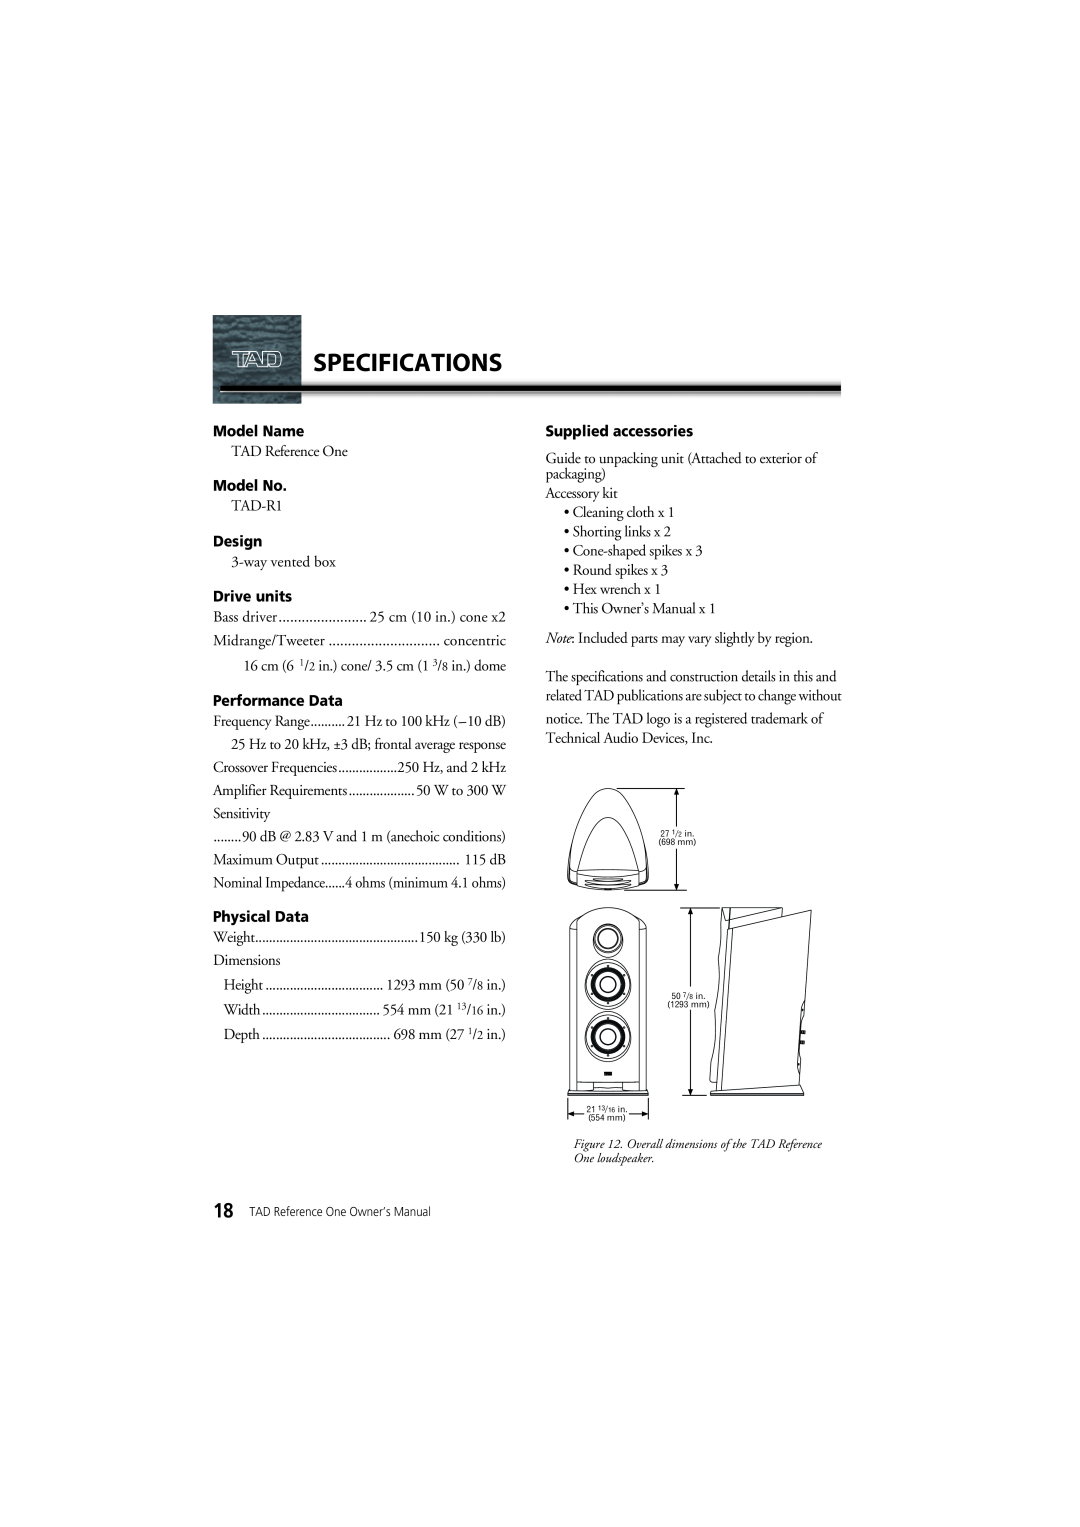 Pioneer TAD-R1 owner manual Specifications, Model Name, Model No, Design, Drive units, Performance Data, Physical Data 